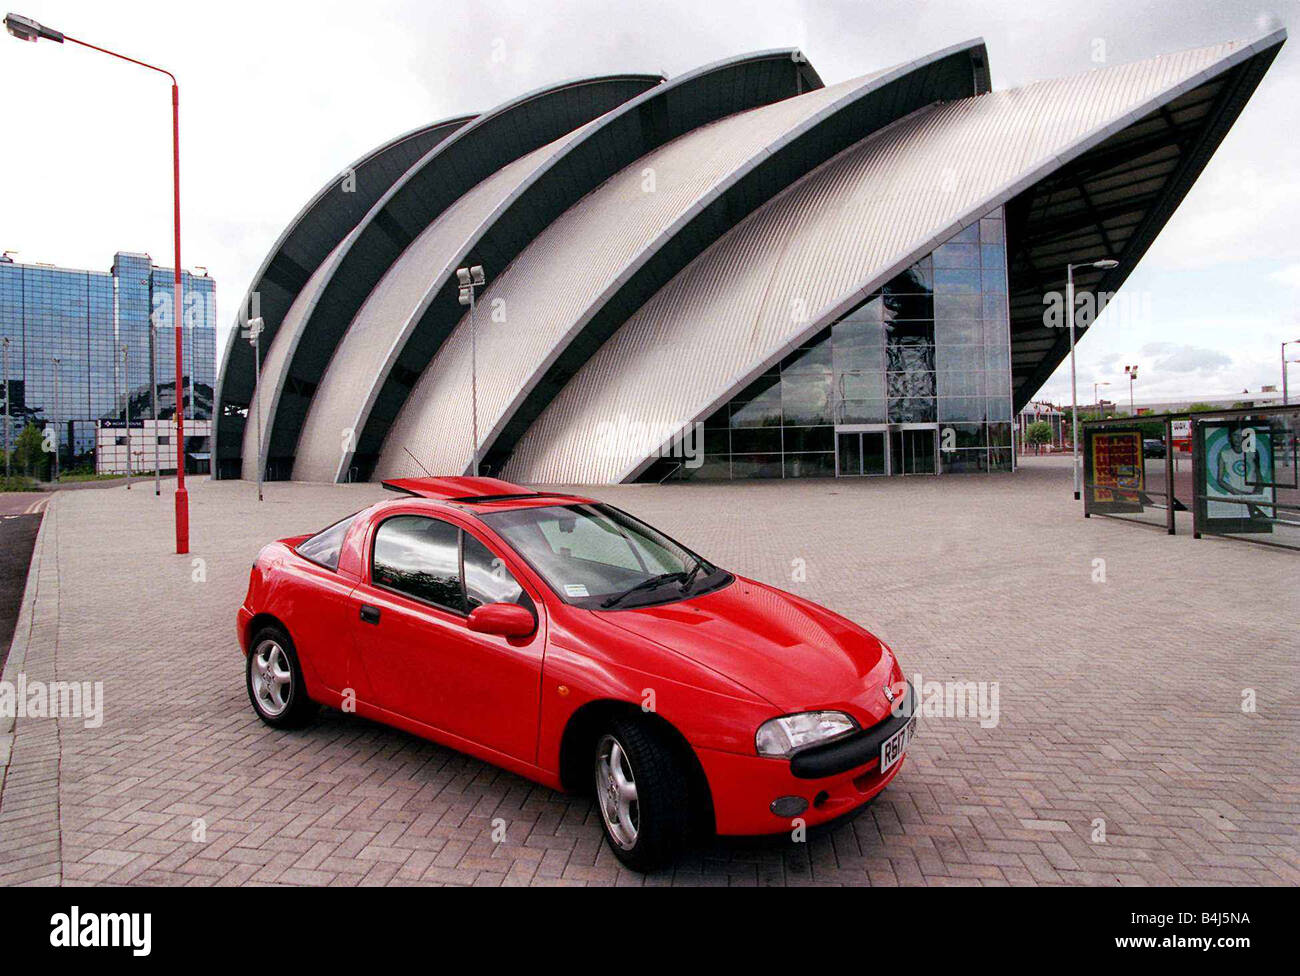 Red Vauxhall Tigra car May 1998 outside CLyde Concert Hall Aramadillo Stock Photo